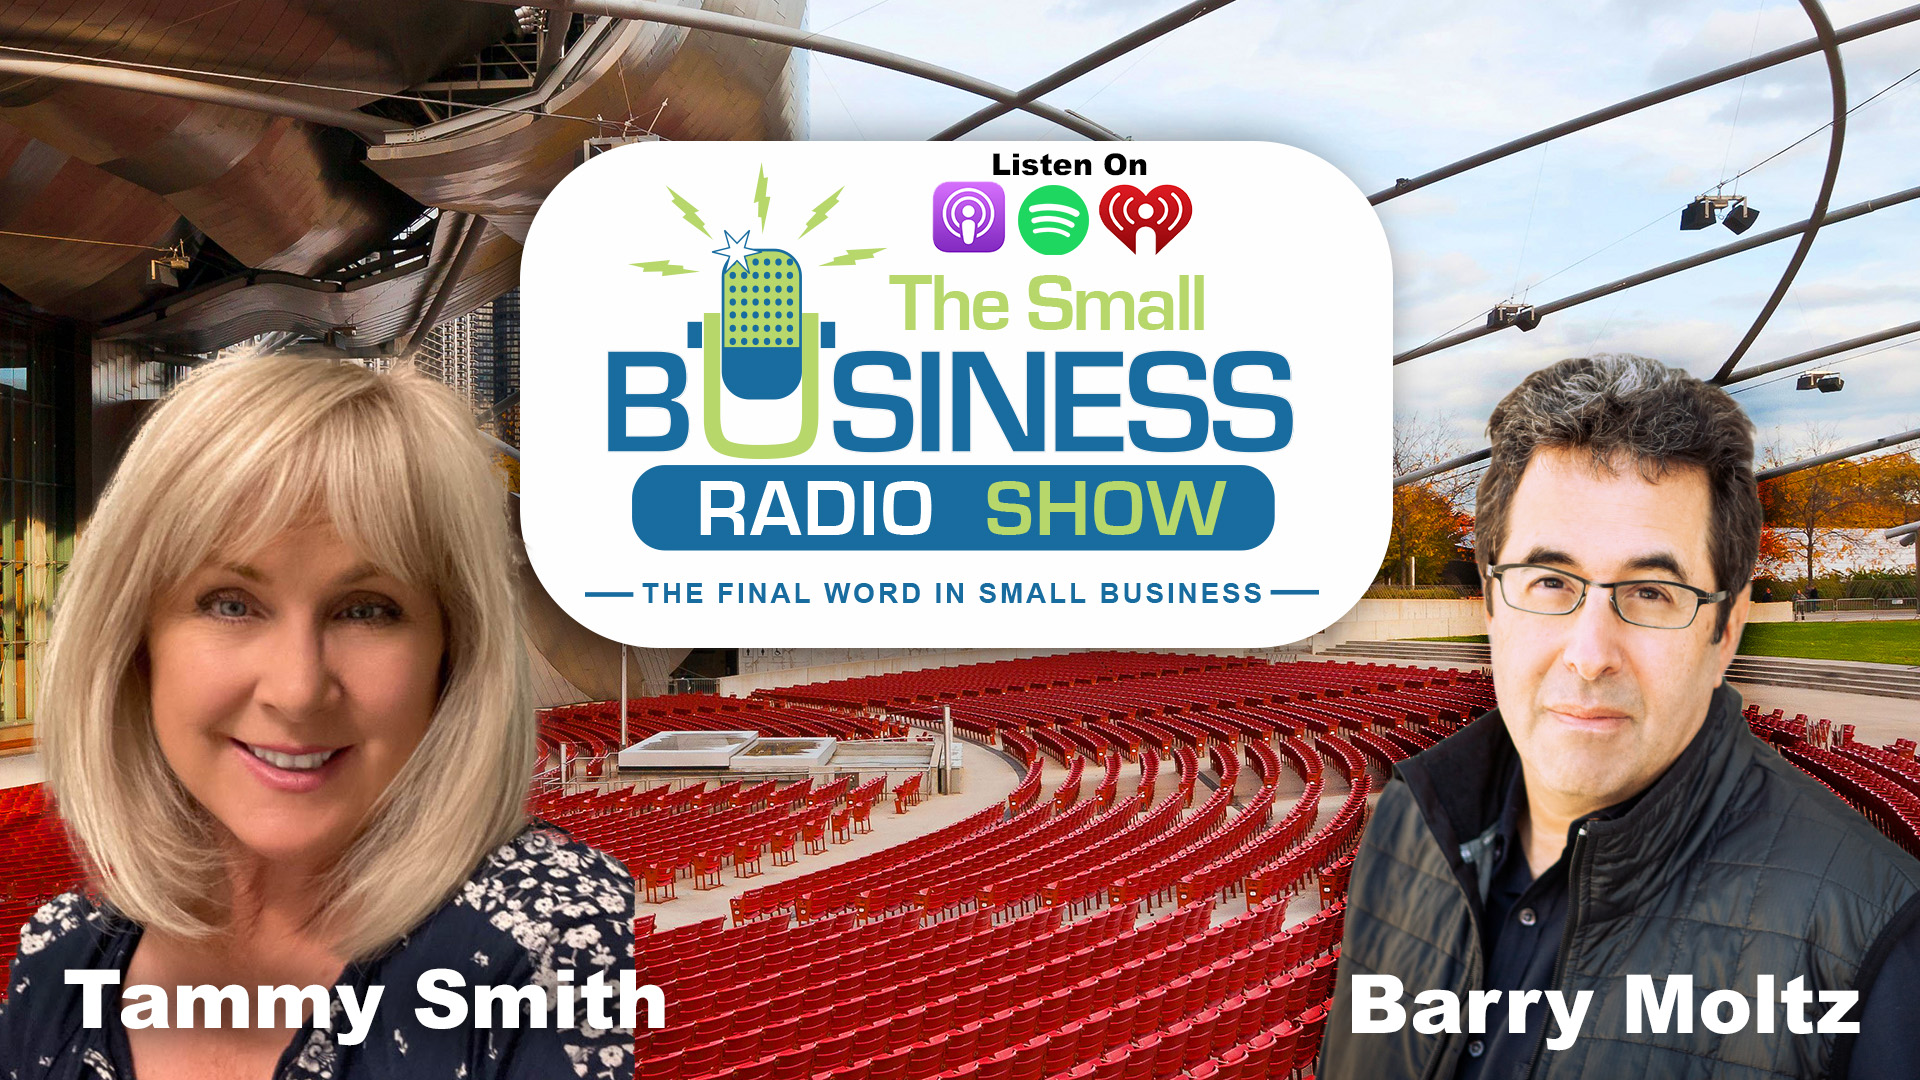 Tammy Smith on The Small Business Radio Show family business